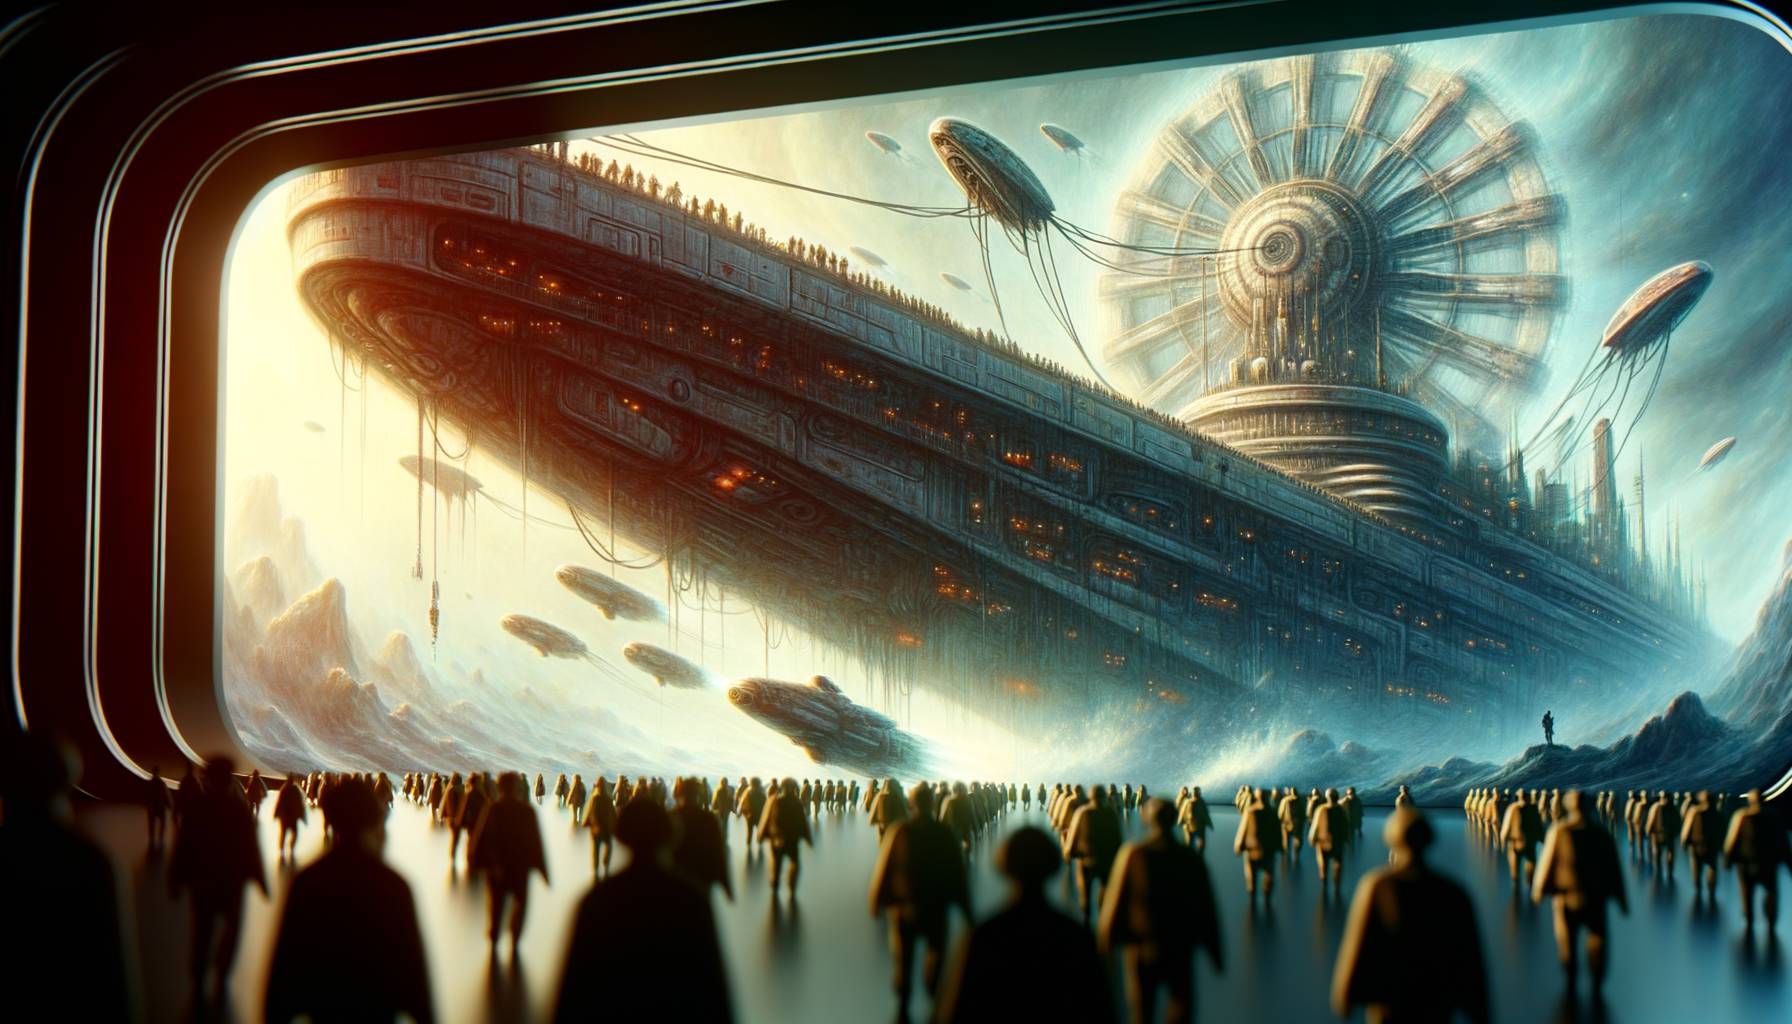 Can Humans Really Survive on a Generation Ship?